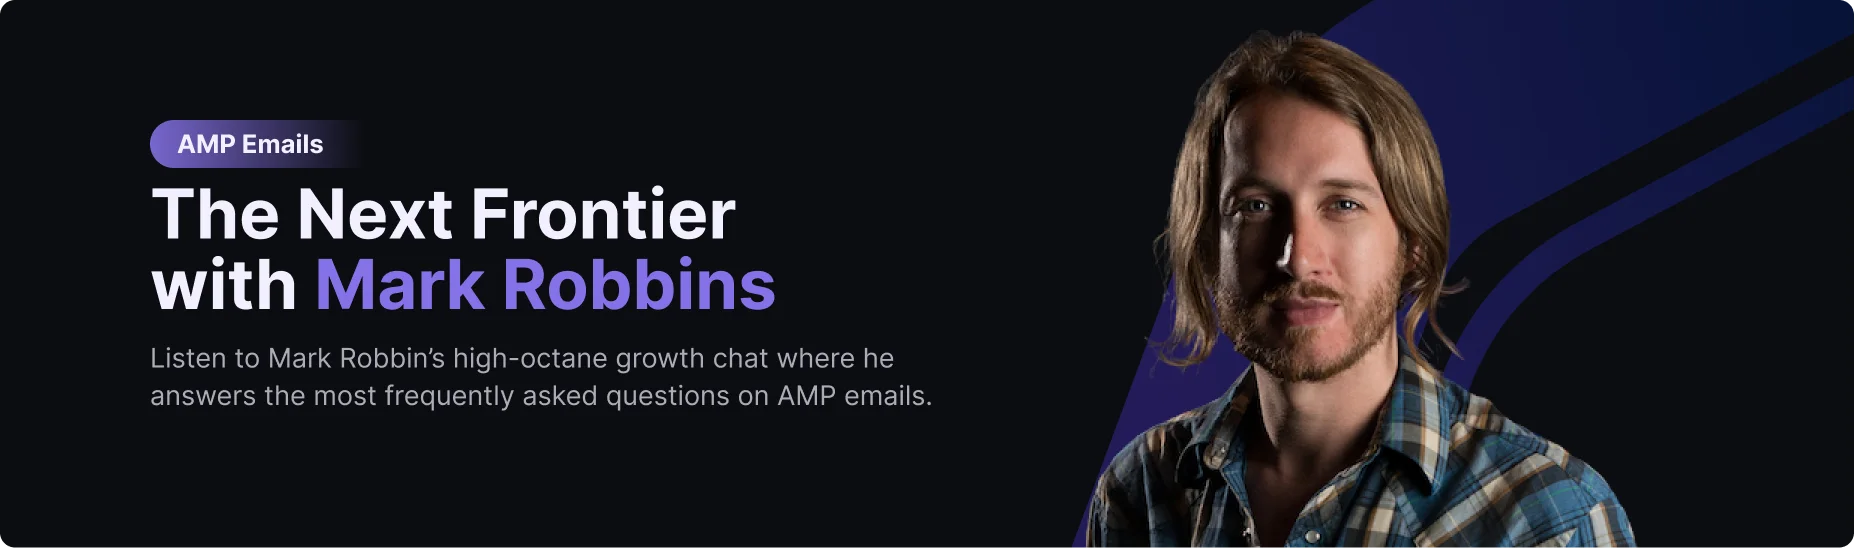 AMP Email Marketing with Mark Robbins banner